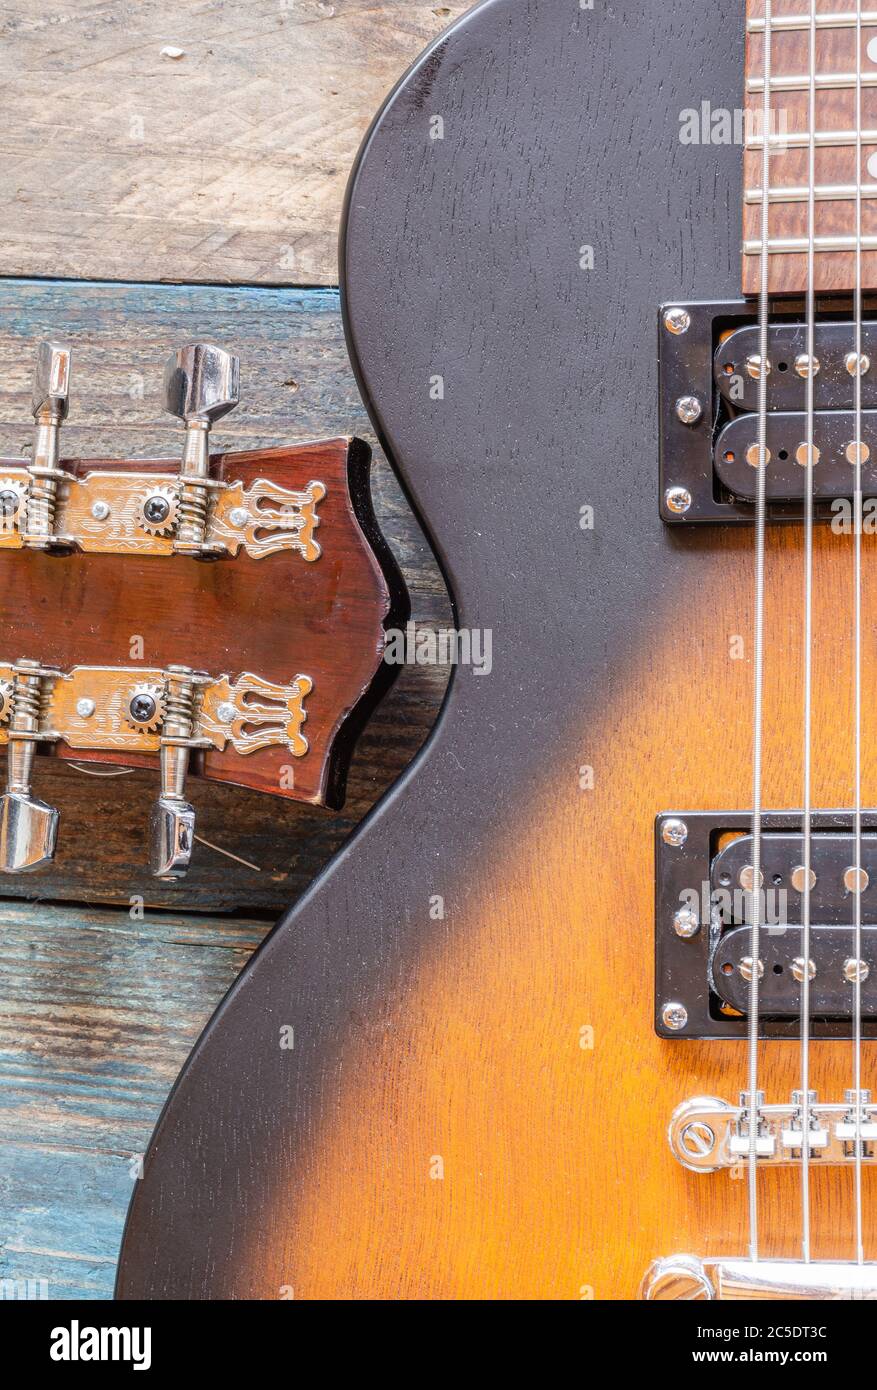 Electric guitar body. Wooden Musical Instrument. Guitar Details. Guitar bridge with strings. Stock Photo